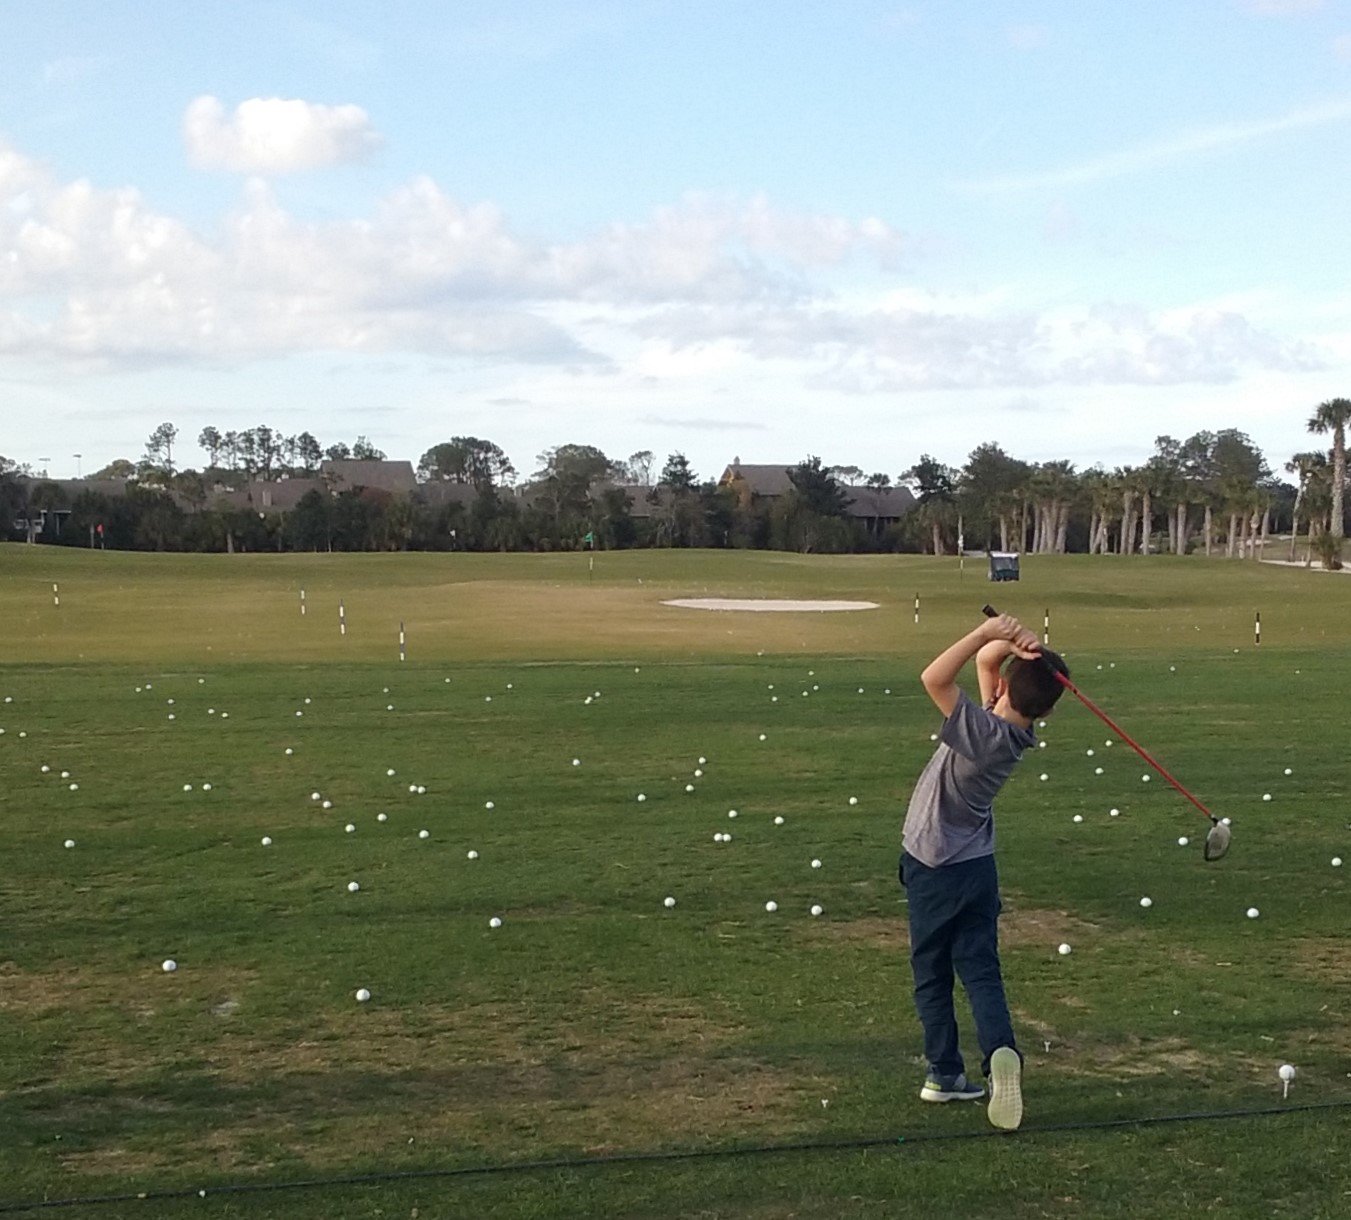 A young golfer demonstrates his skill on the driving range during the Tesori Family Foundation All-Star Kids Clinic on March 10.